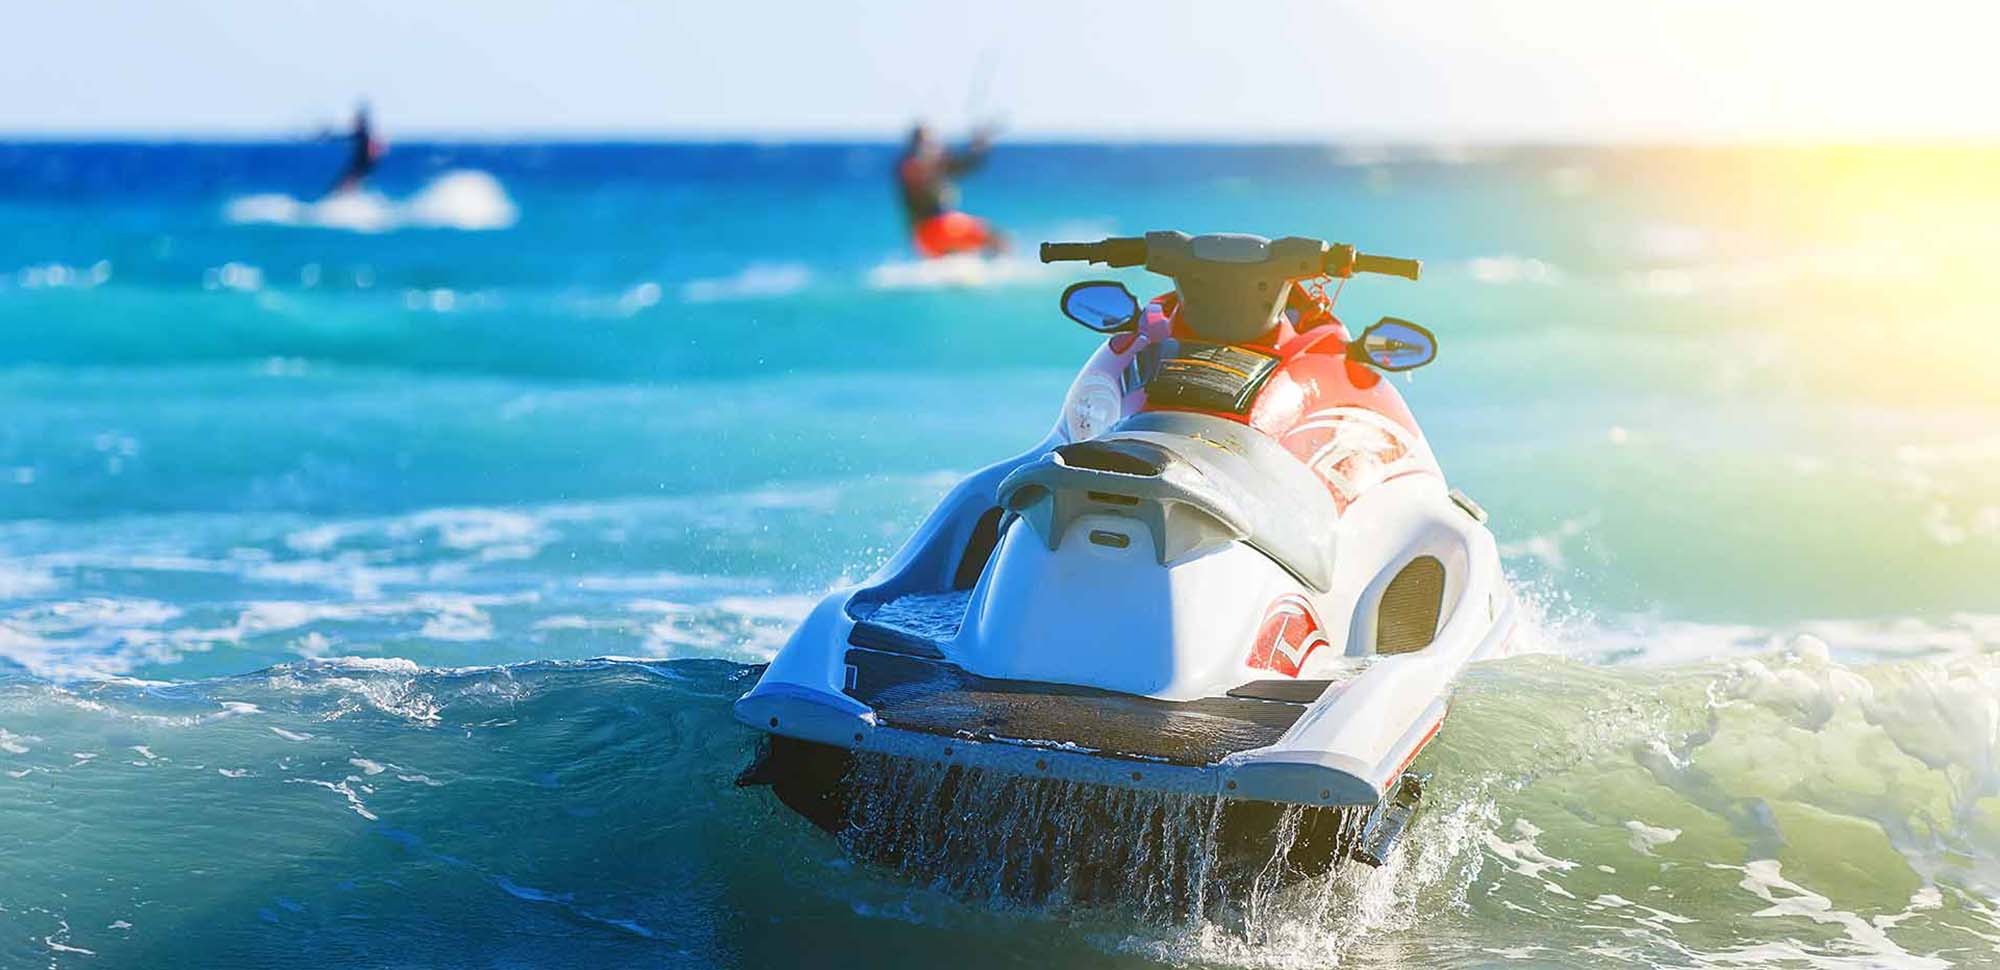 Buying A Jet Ski Is A Lot Like Purchasing A Car Or Truck